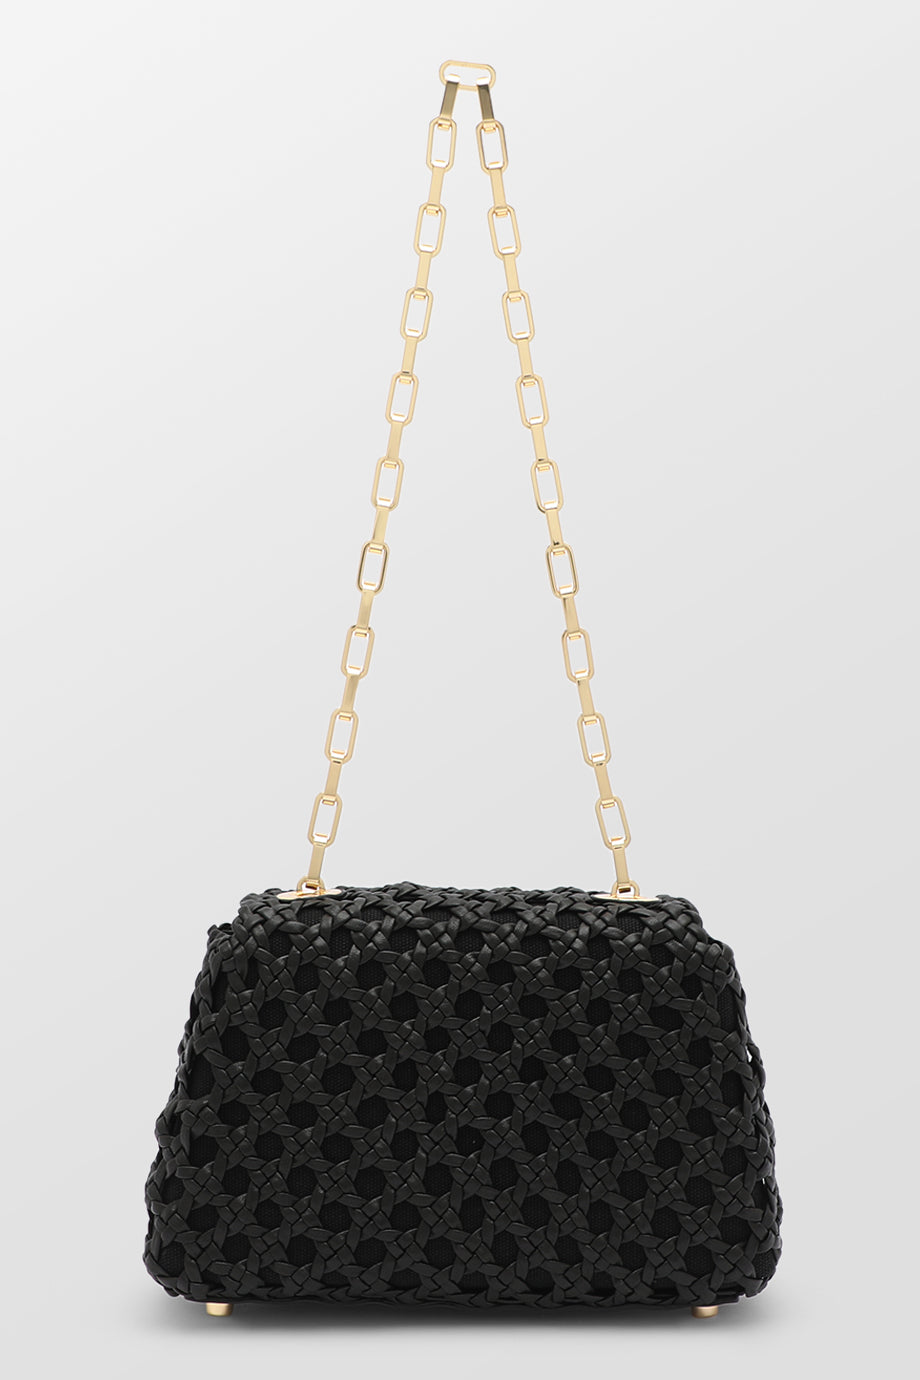 Black Woven Leather Bag